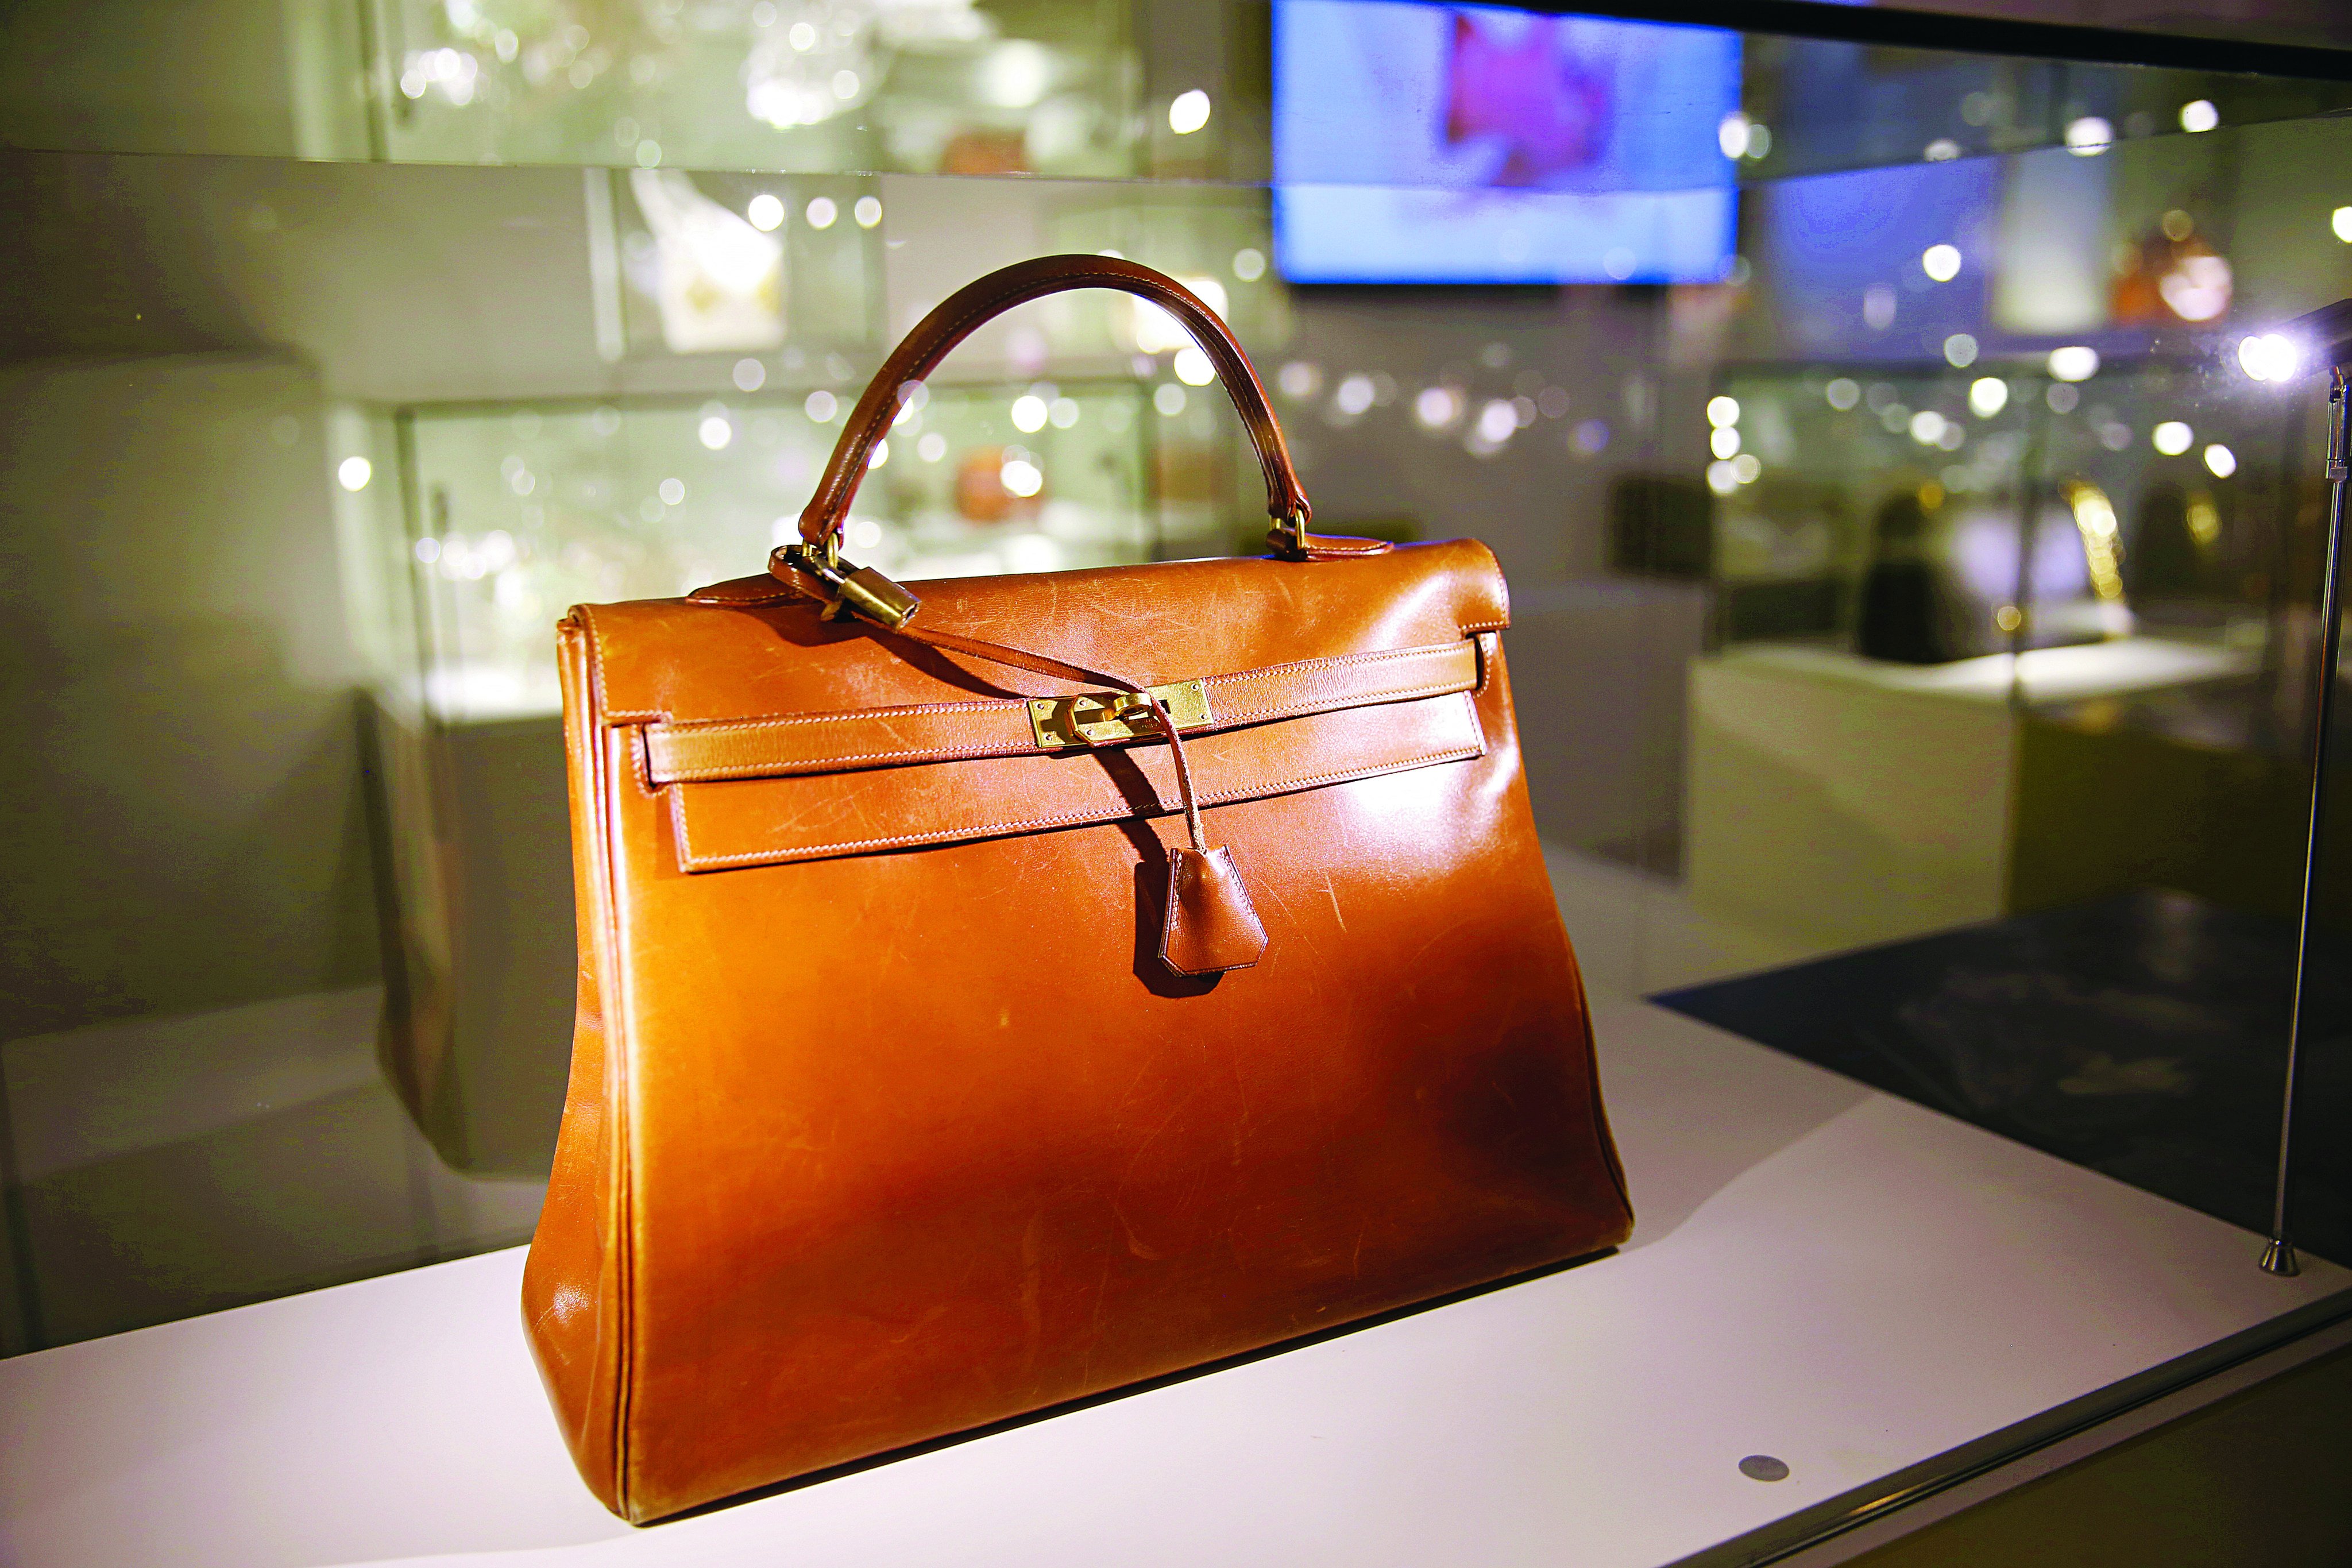 Hong Kong Property Tycoon Joseph Lau's Rare Bags on Sale at Sotheby's – WWD